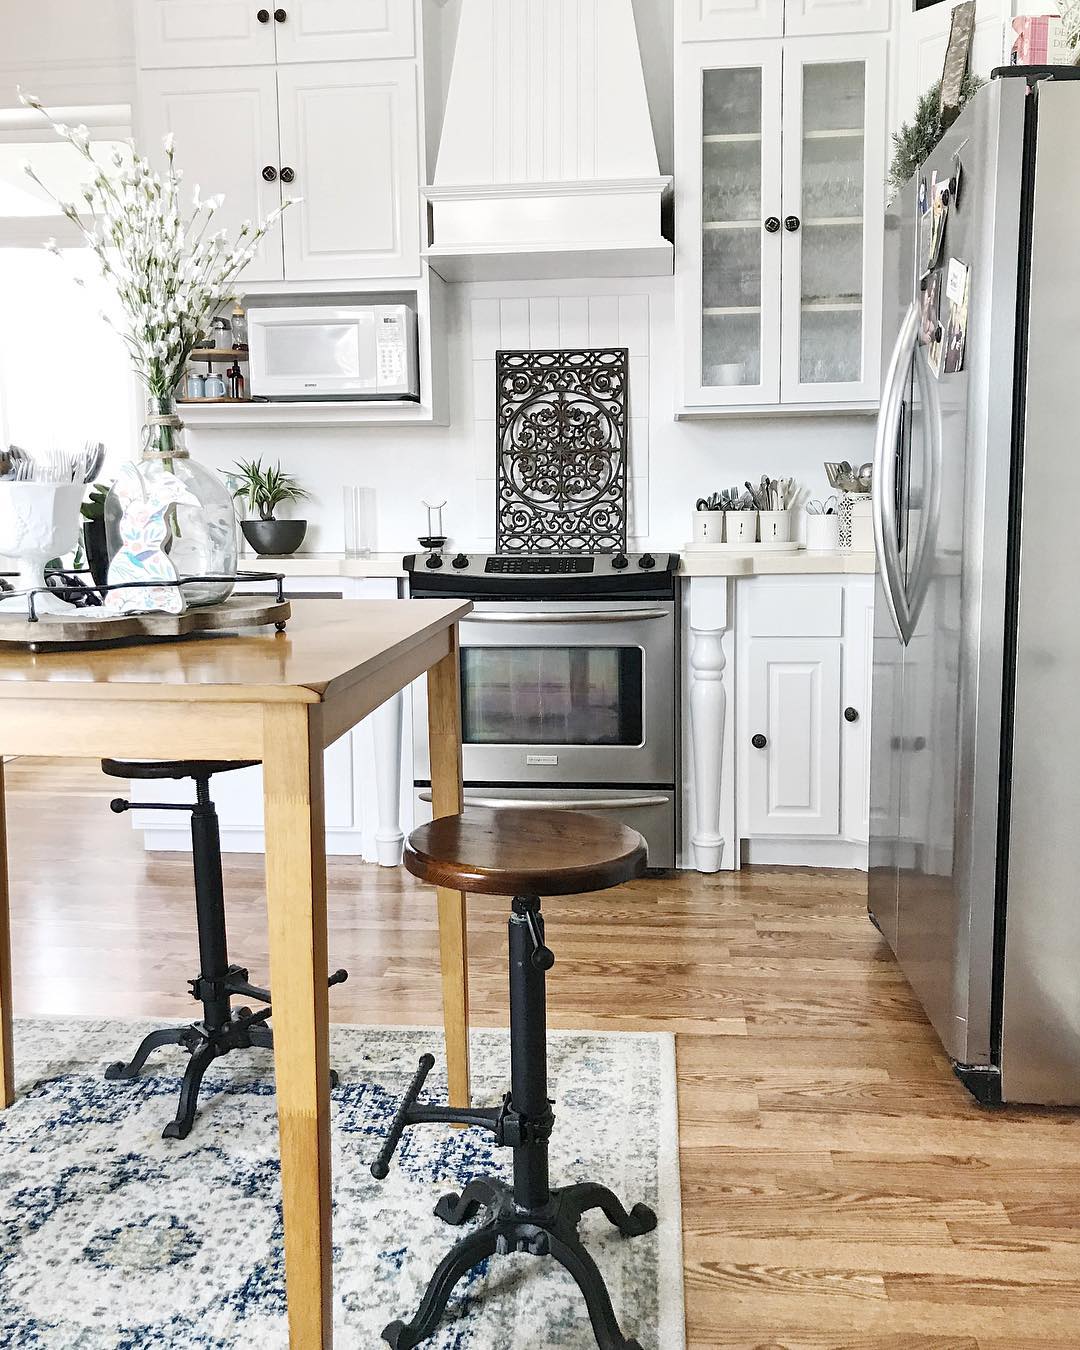 Antique bar stools in kitchen. Photo by Instagram user @thelunthouse